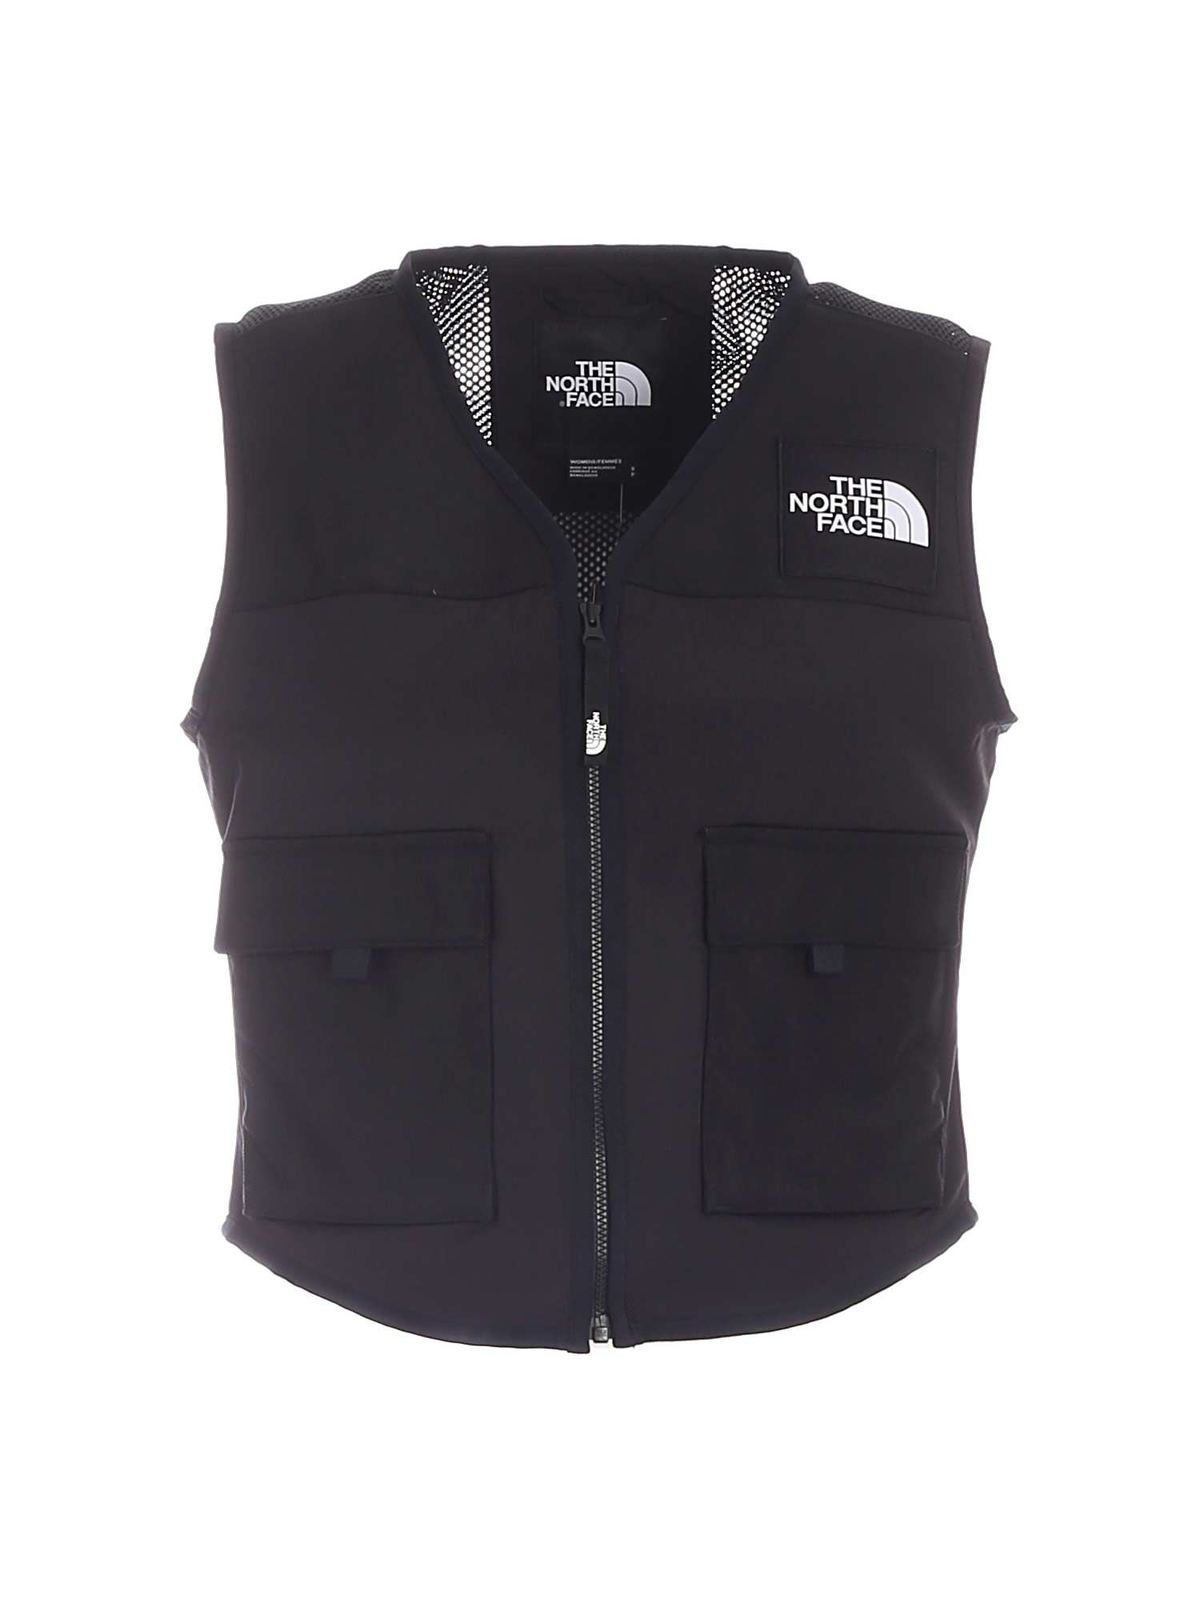 THE NORTH FACE UTILITY BOX WAISTCOAT IN BLACK